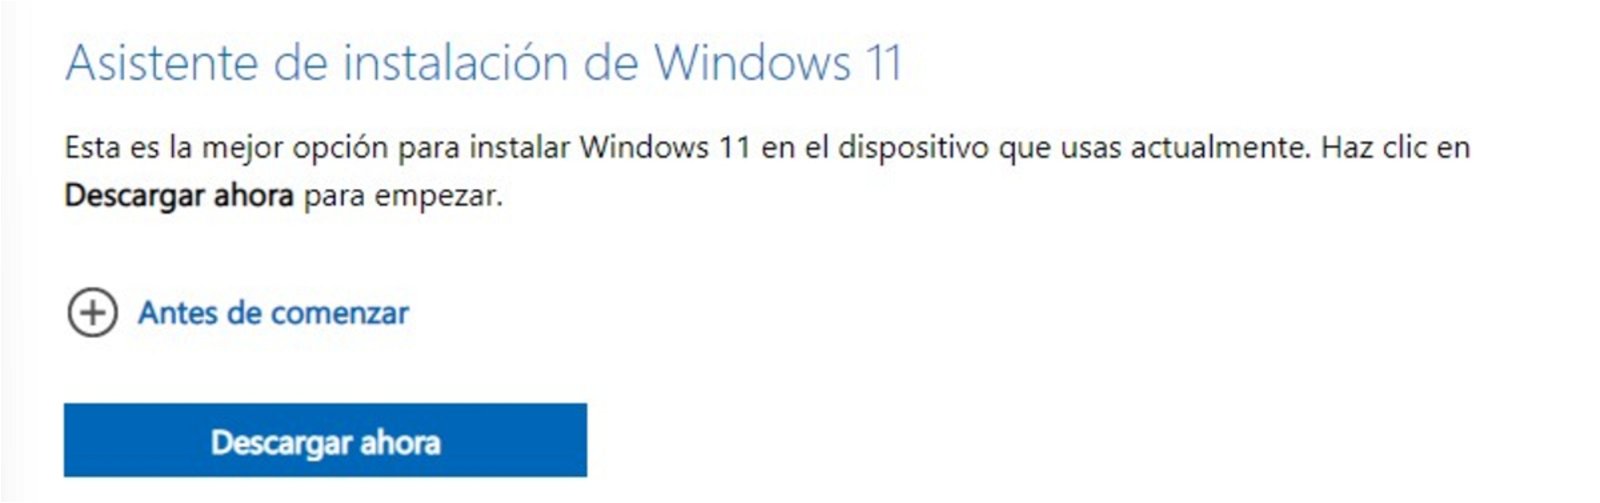 How to upgrade to Windows 11 from Windows 10 step by step